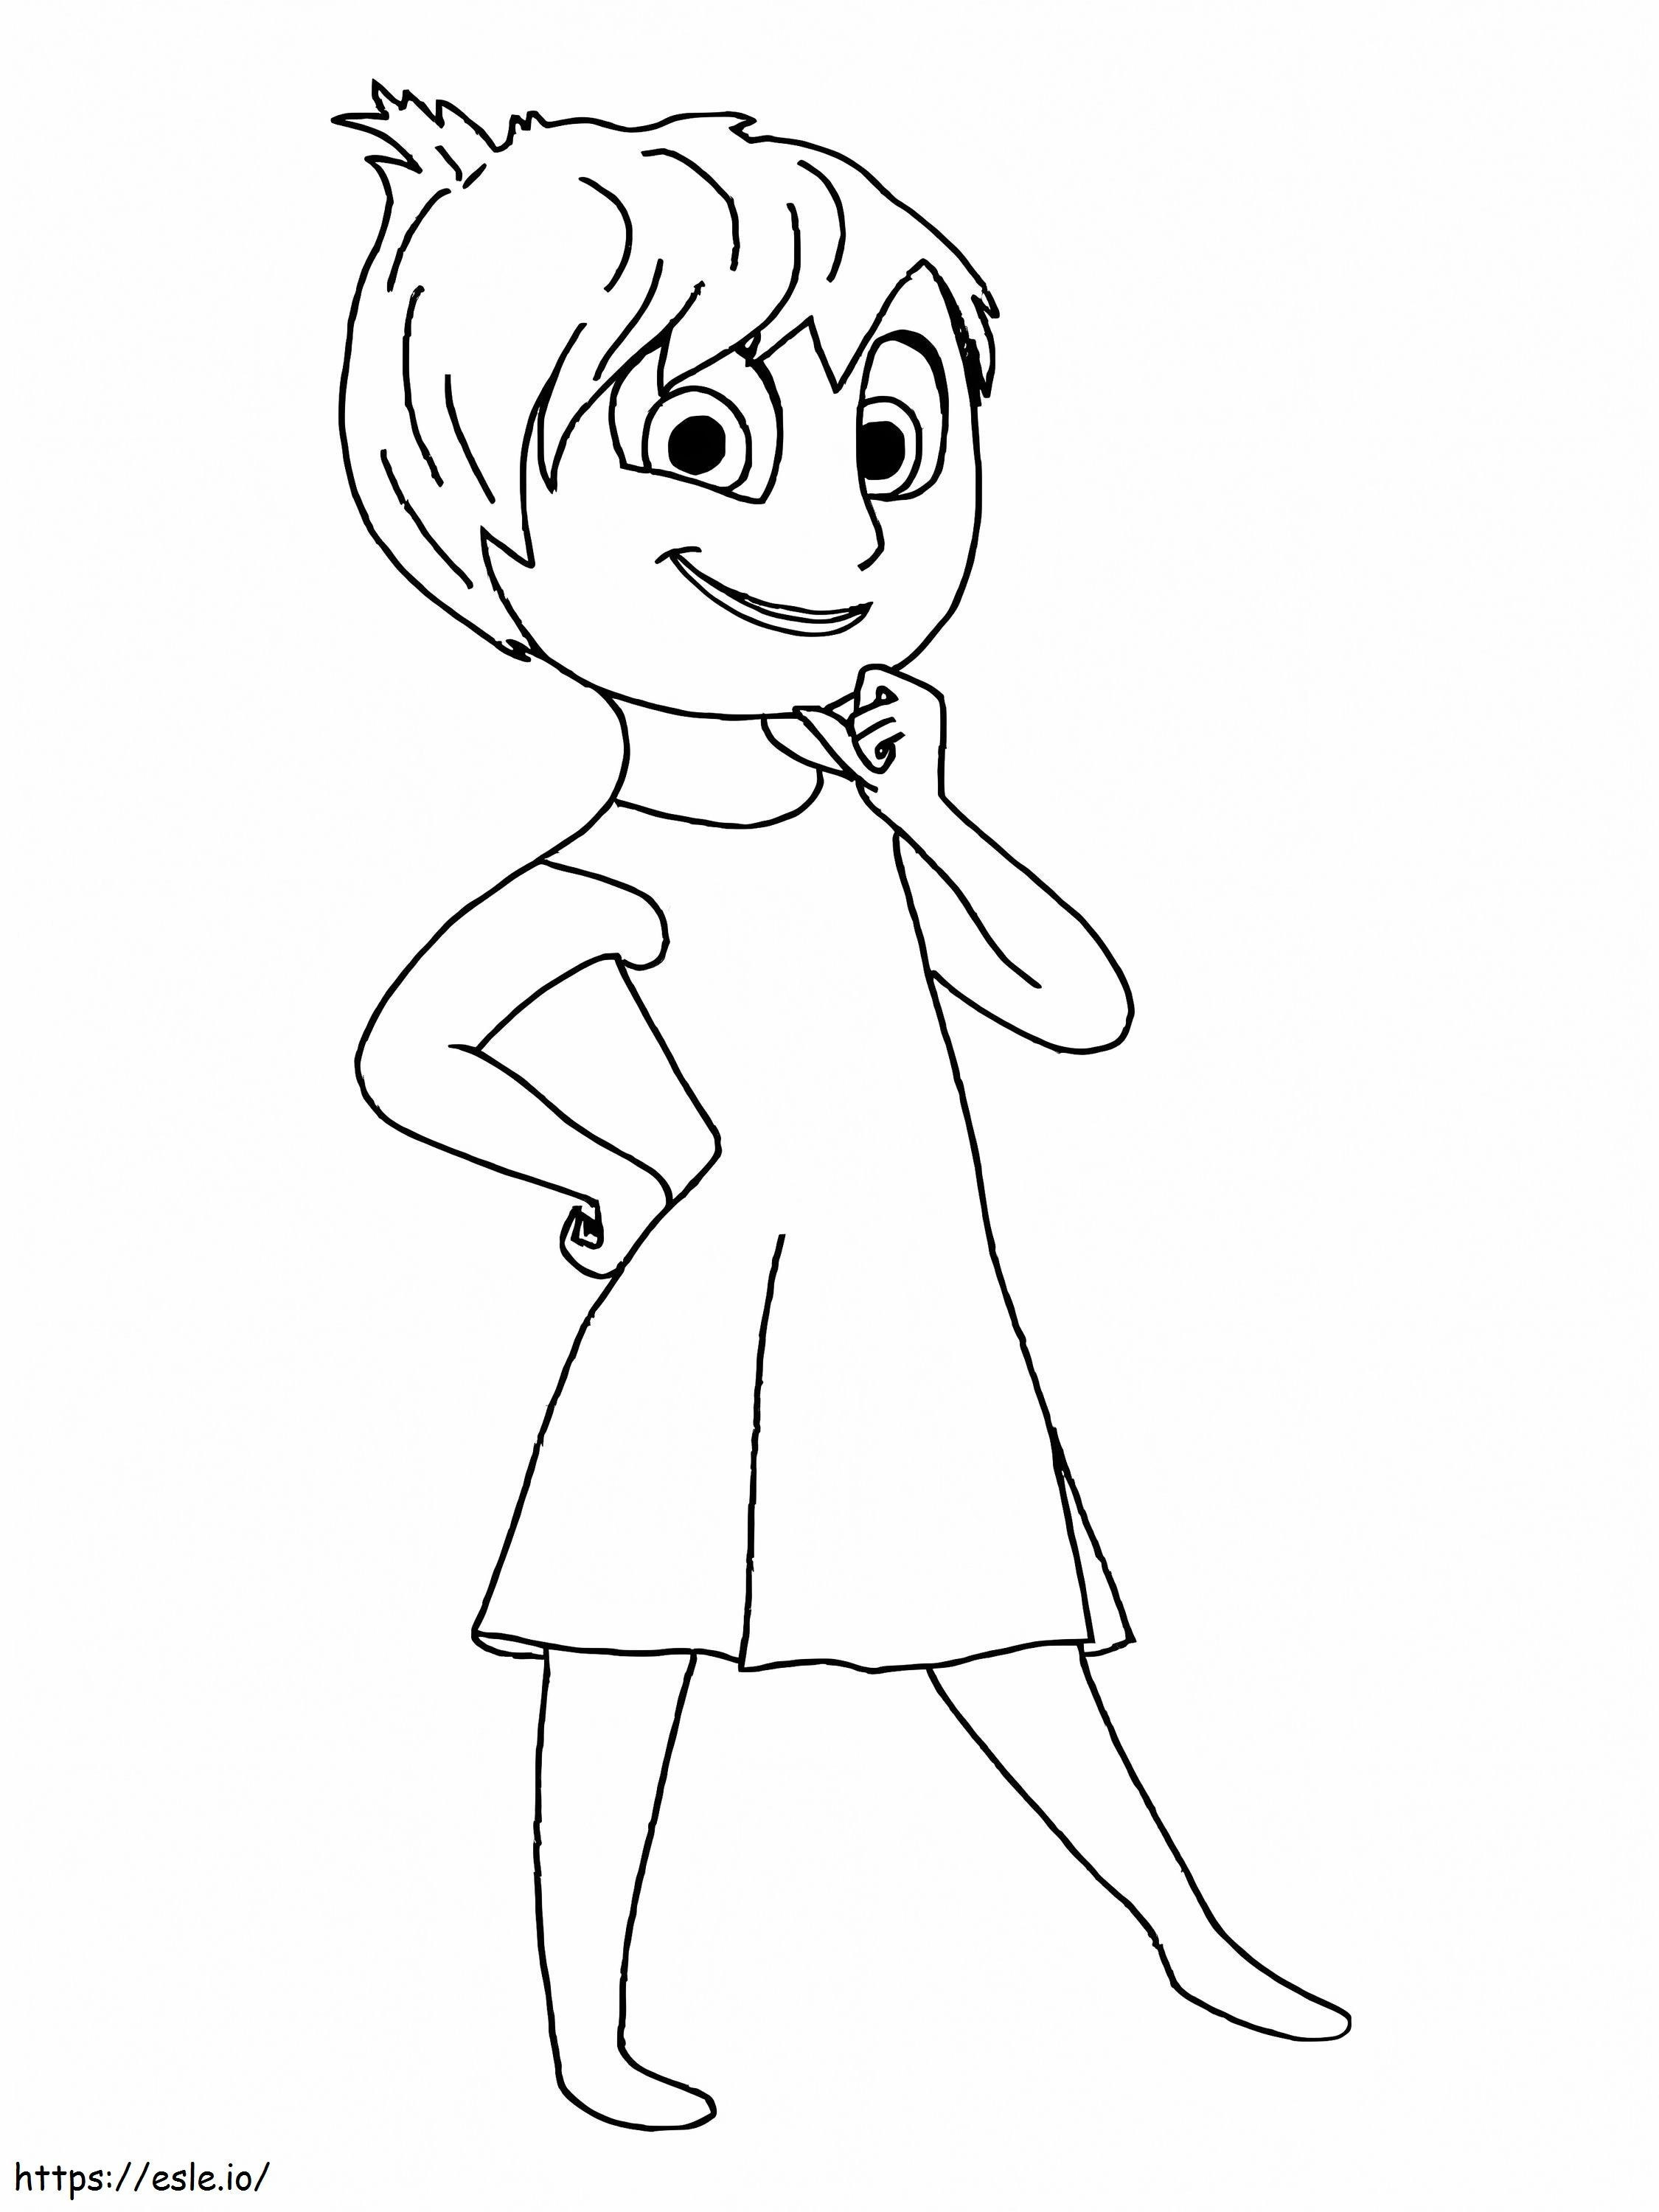 Lovely Joy coloring page